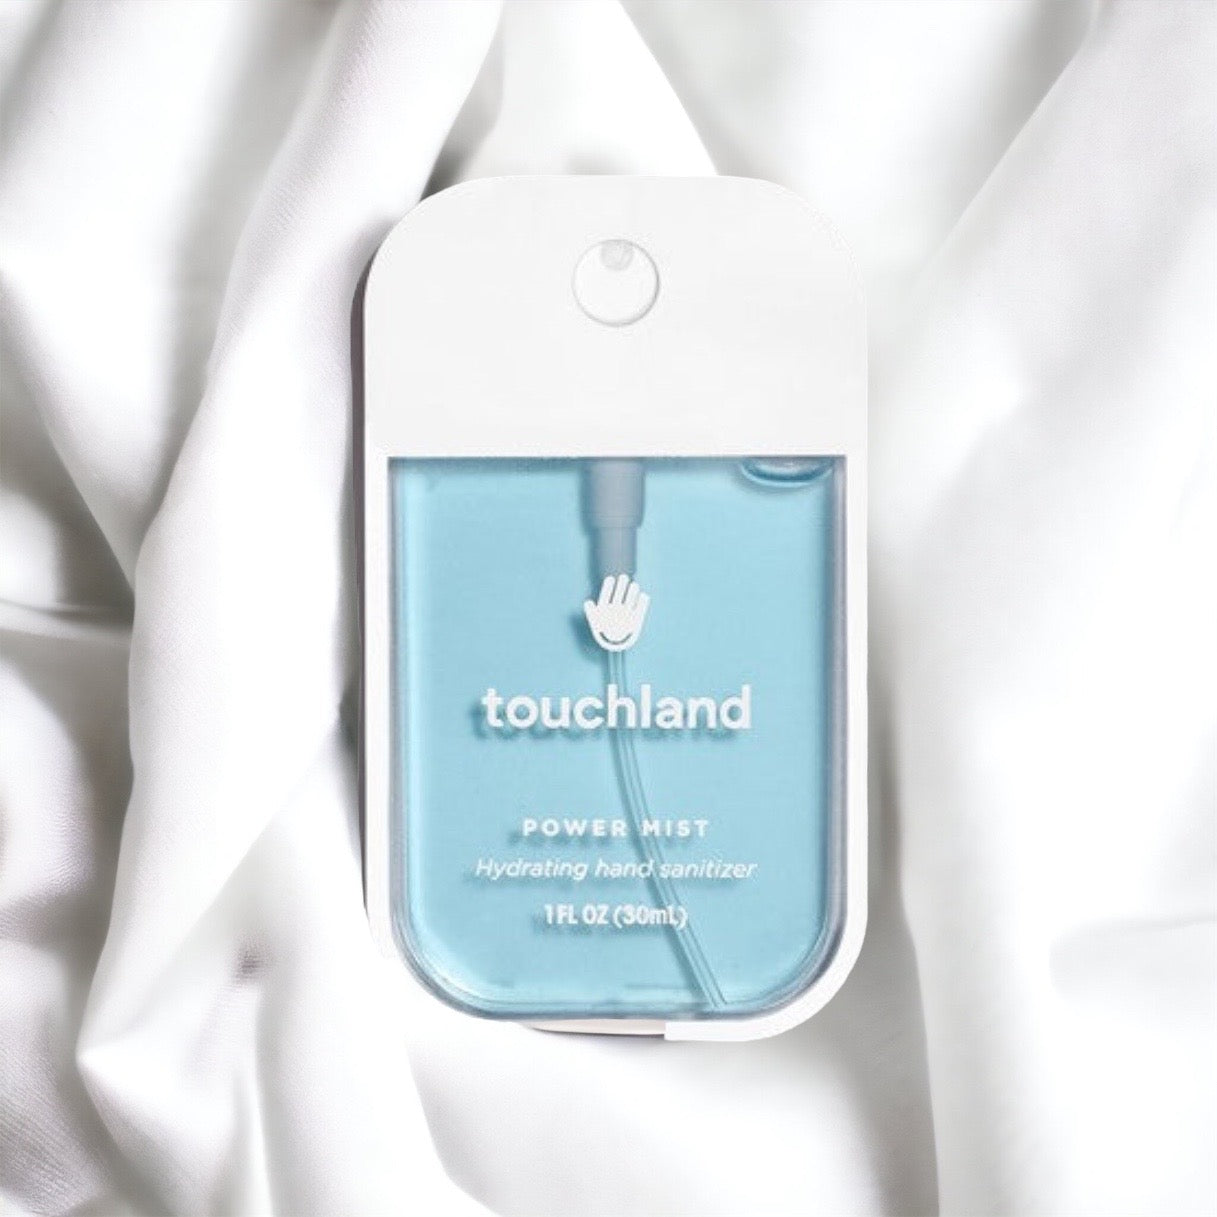 Touchland Power Mist Frosted Mint Hand Sanitizer